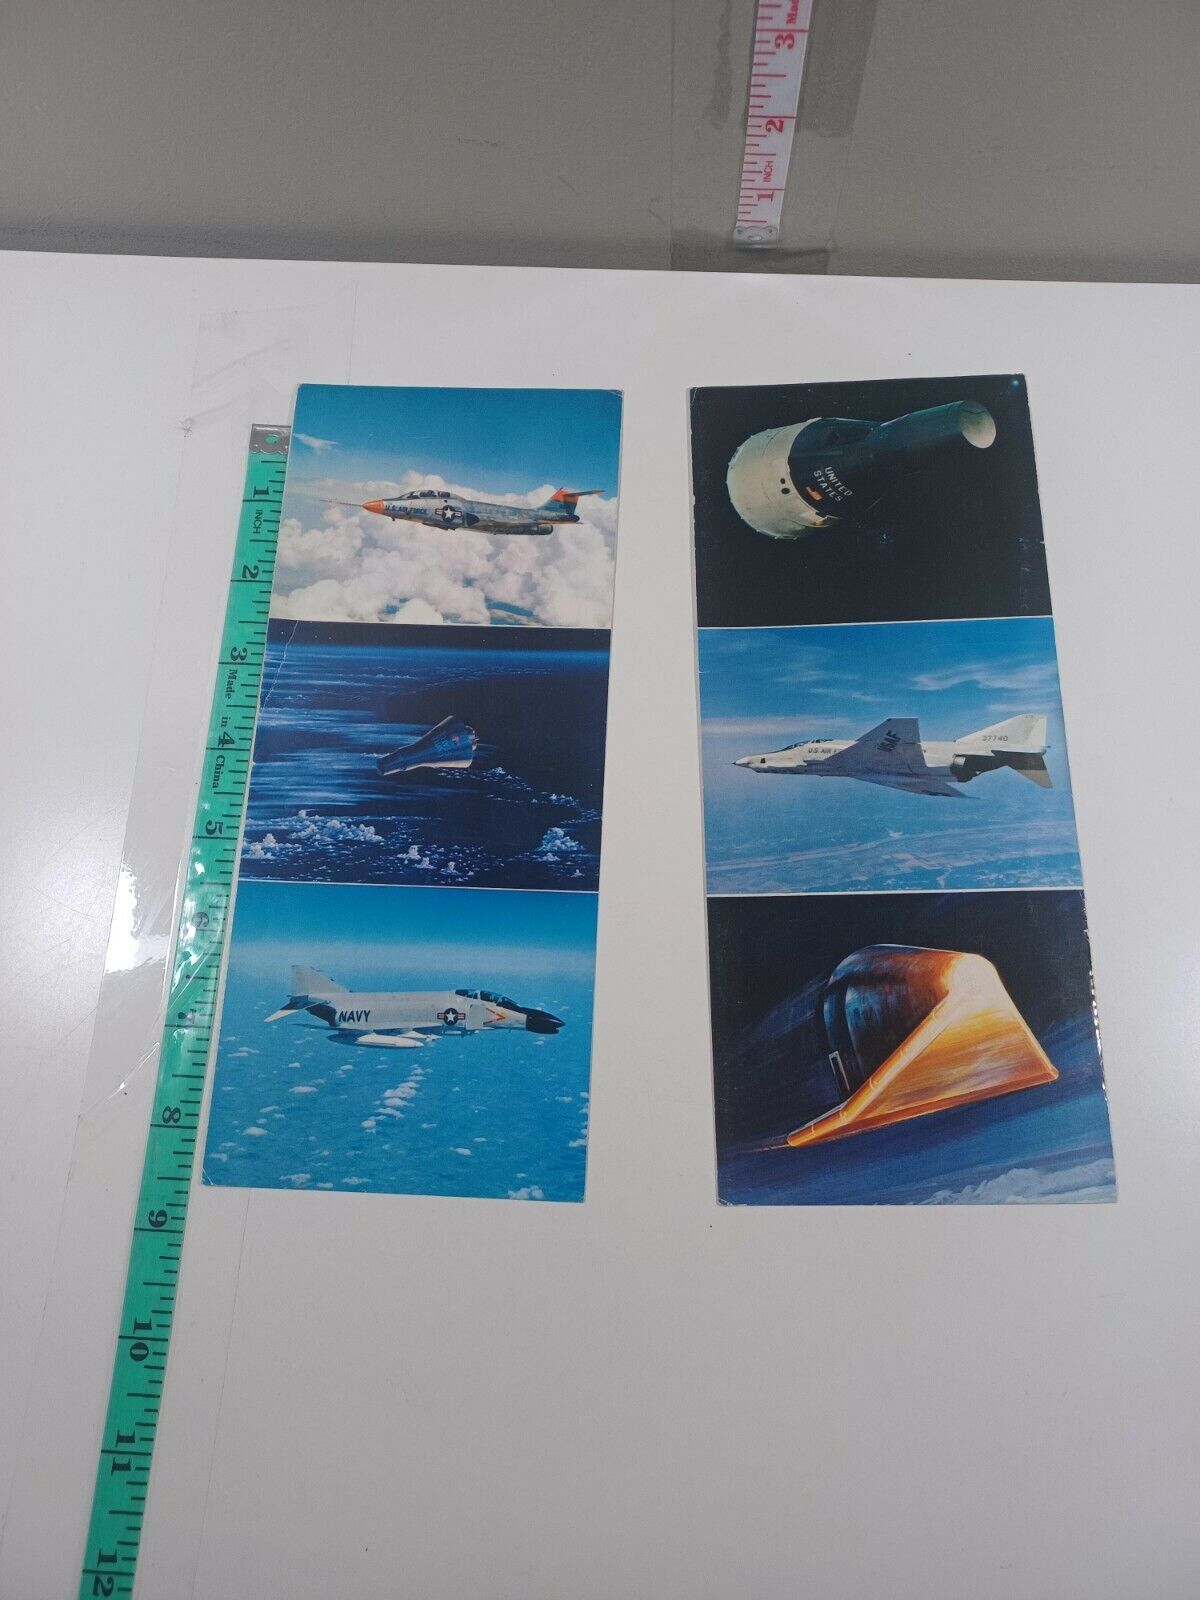 2 nasa post cards with gemini, mercury photos and information  (Book 5 #2) - $5.94